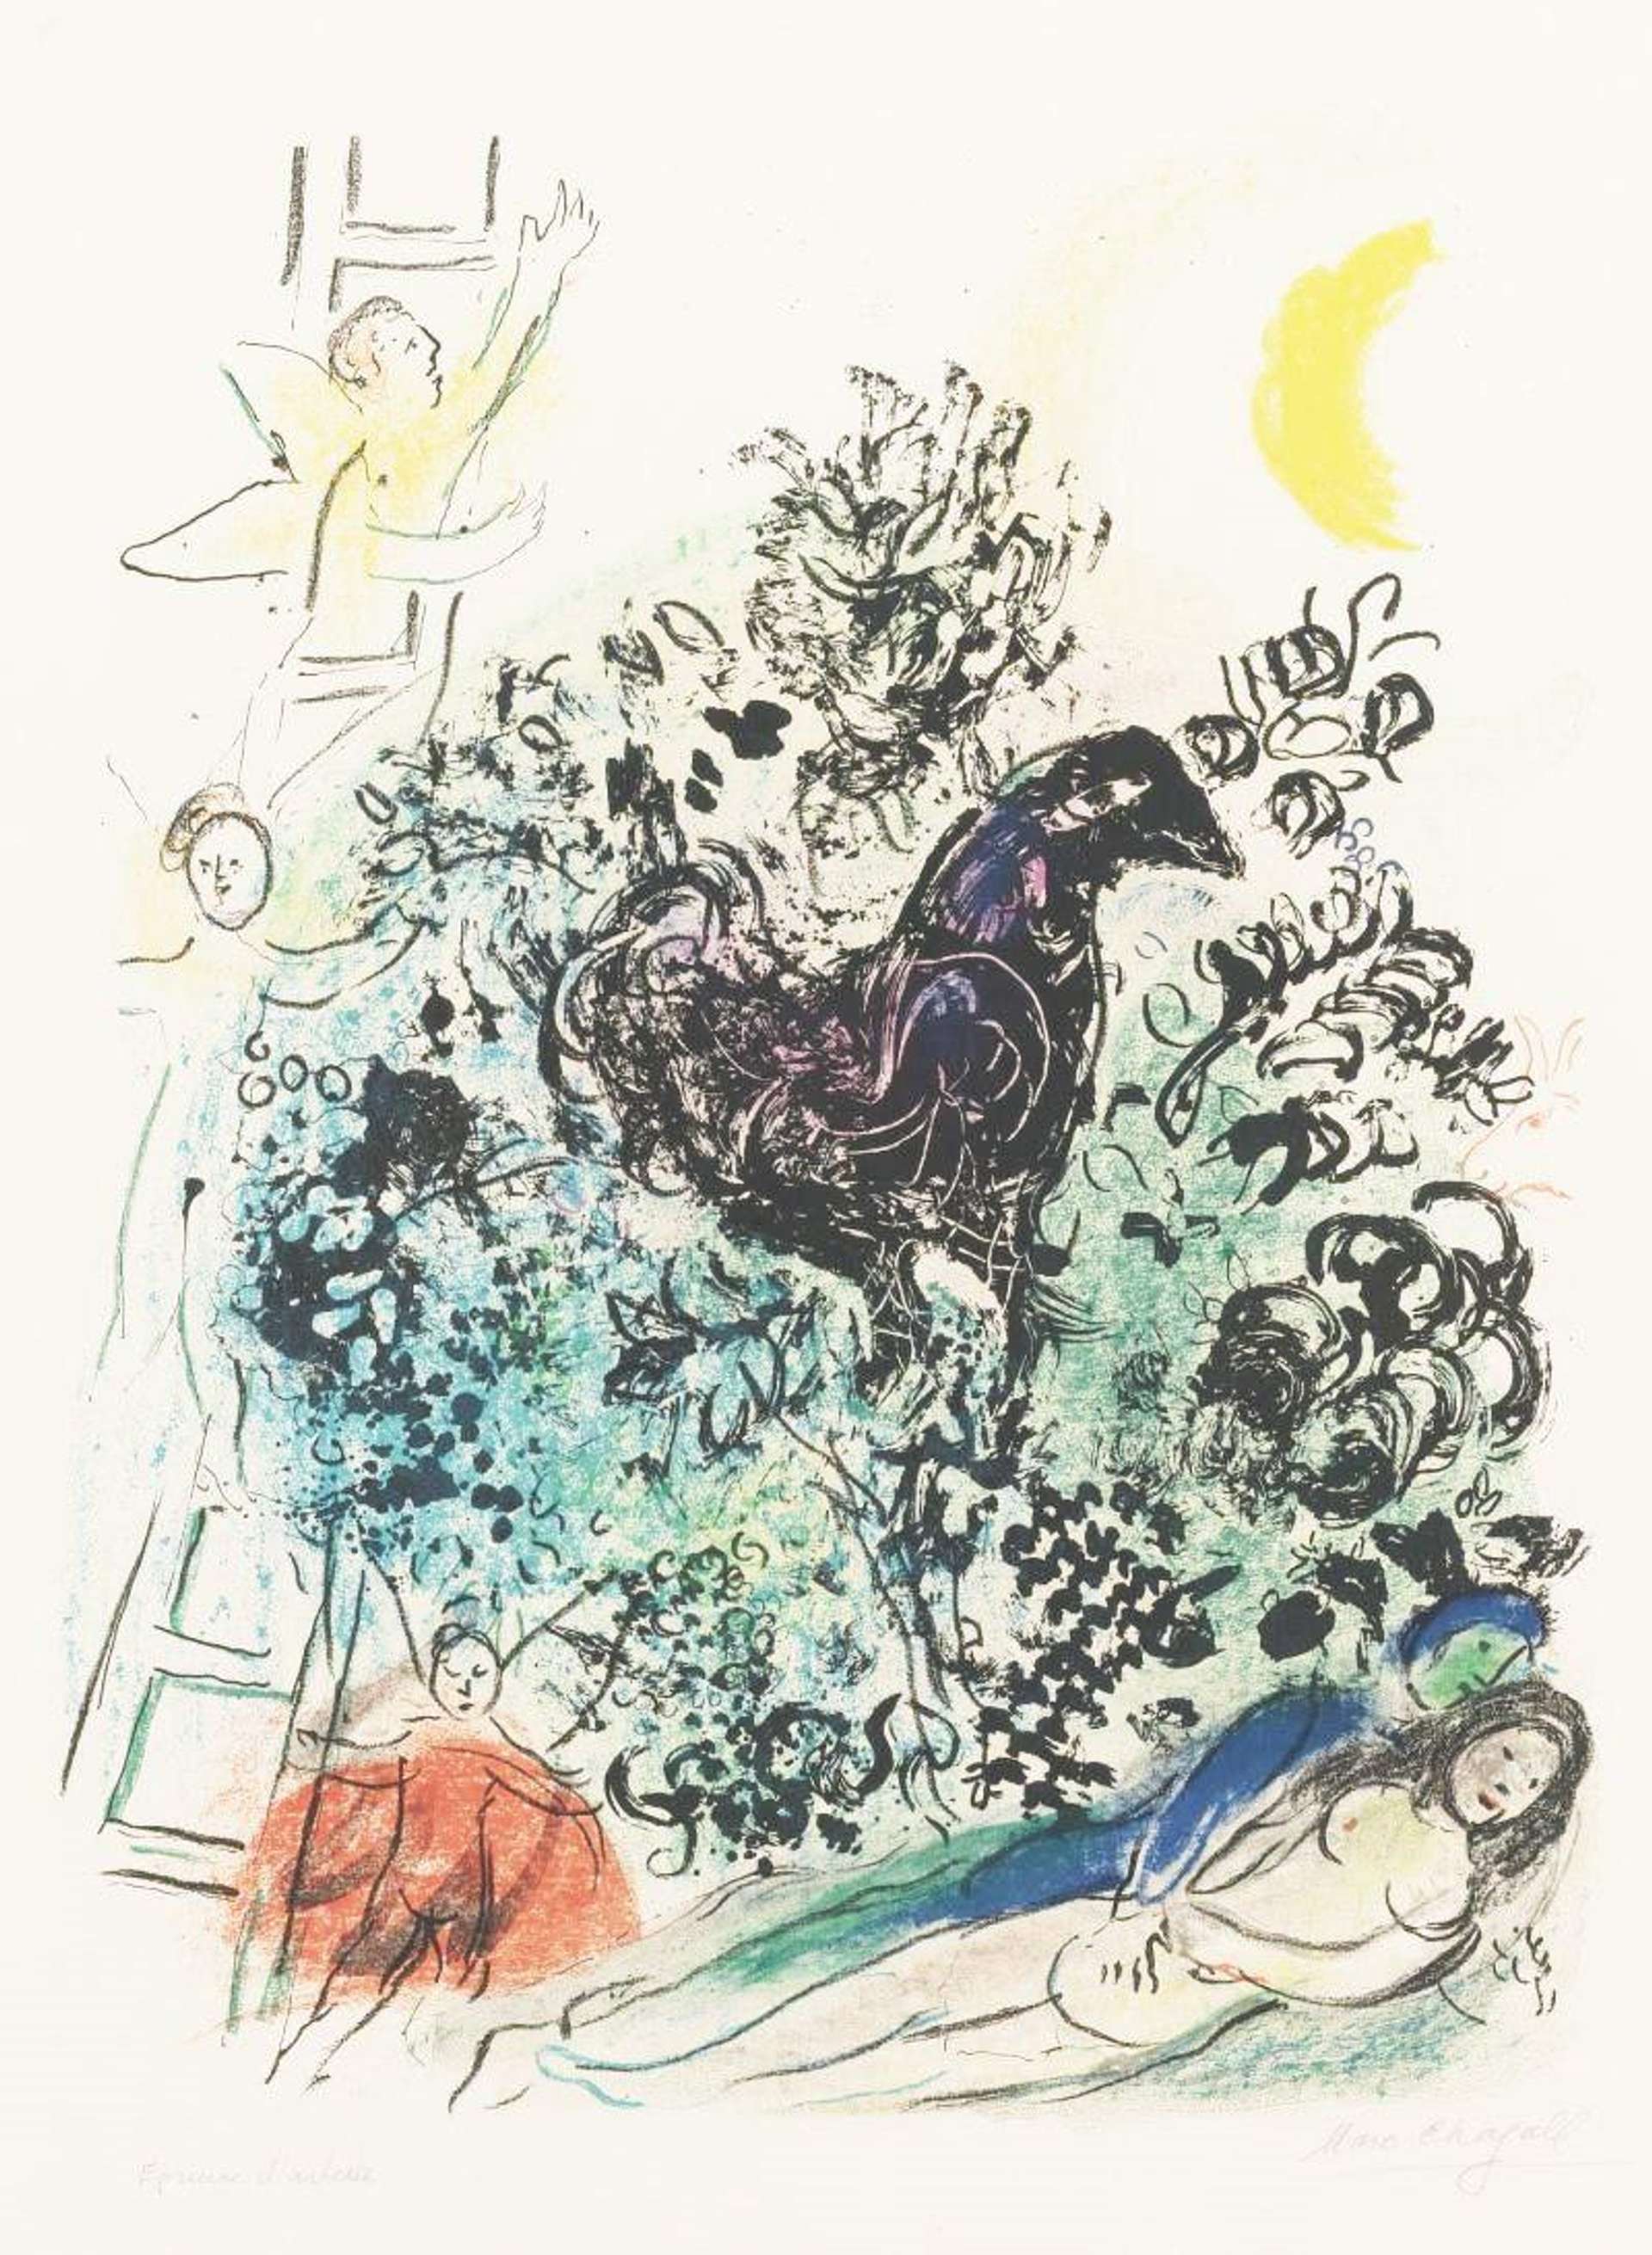 Lover's Dream - Signed Print by Marc Chagall 1961 - MyArtBroker